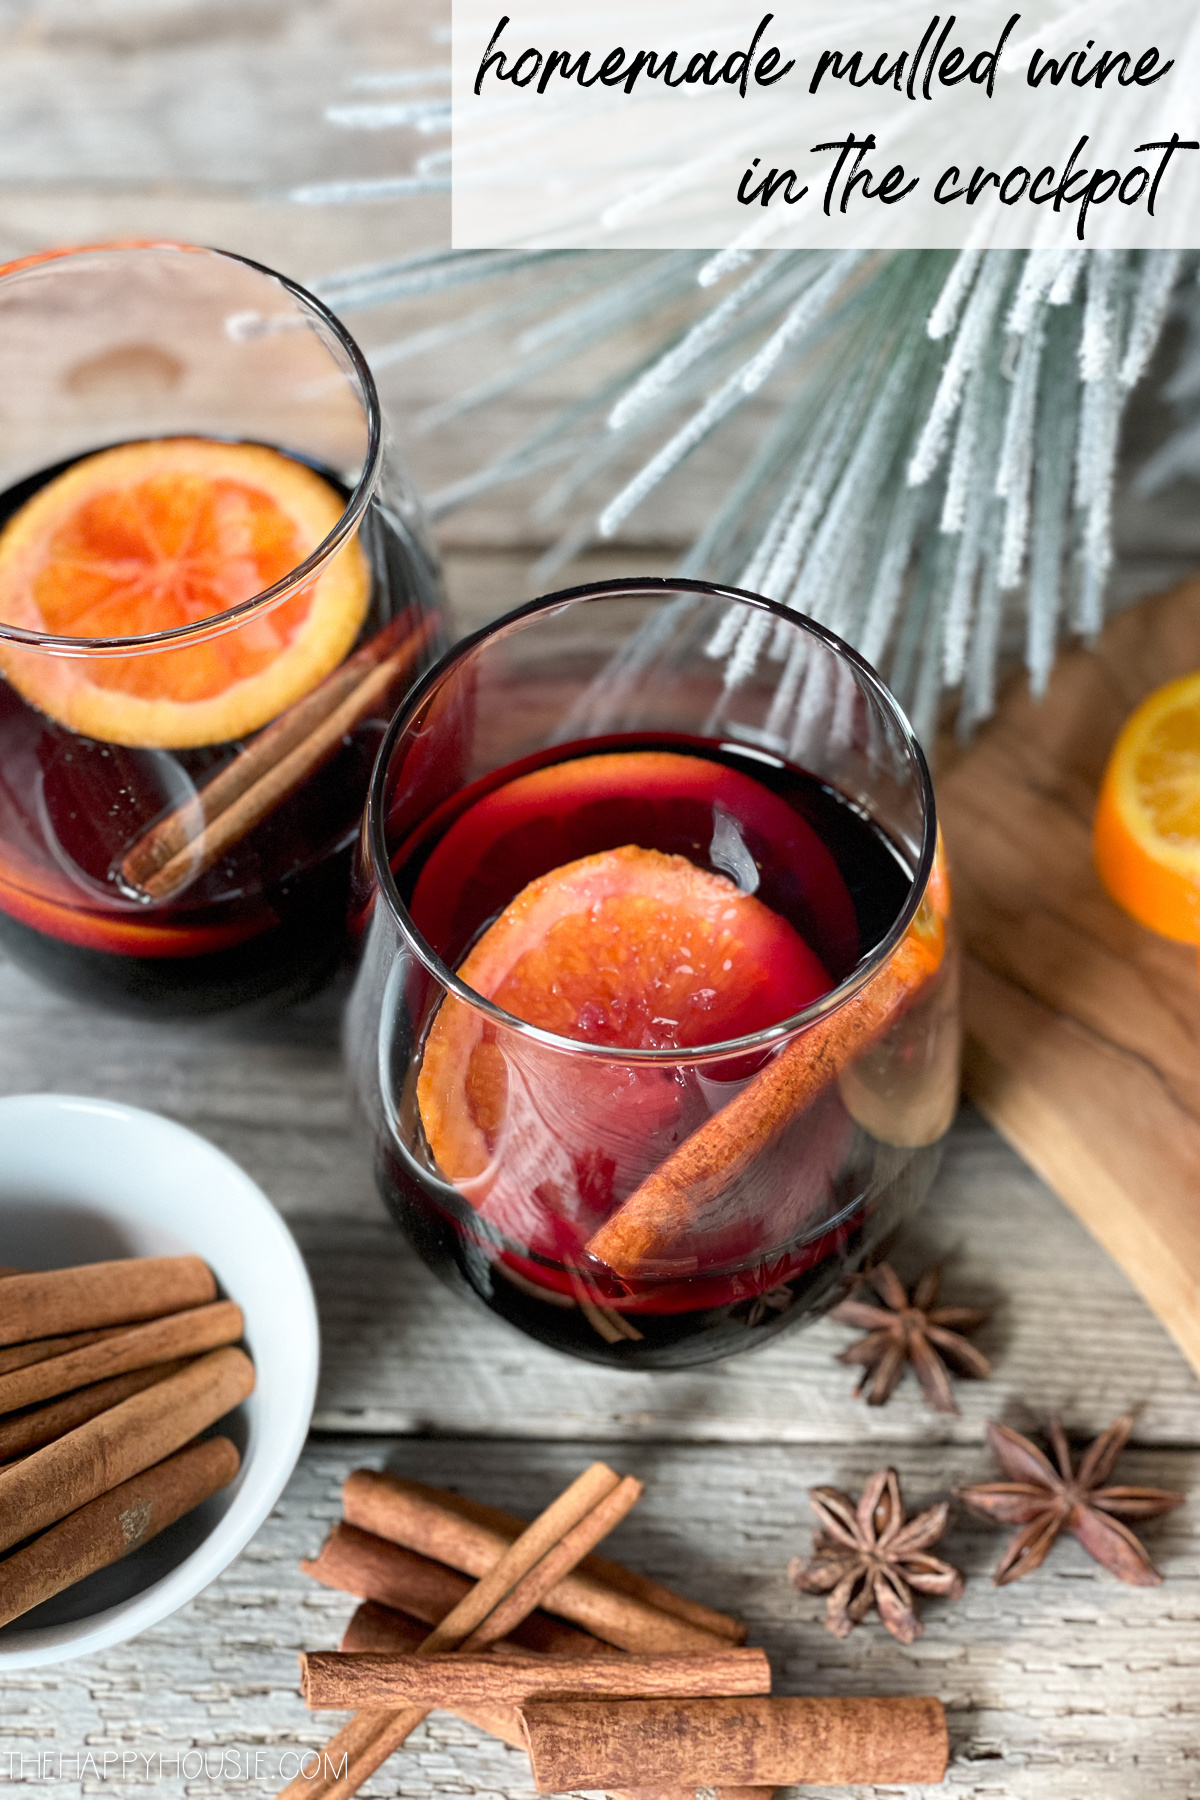 Homemade spiced mulled wine garnished with orange slices and cinnamon